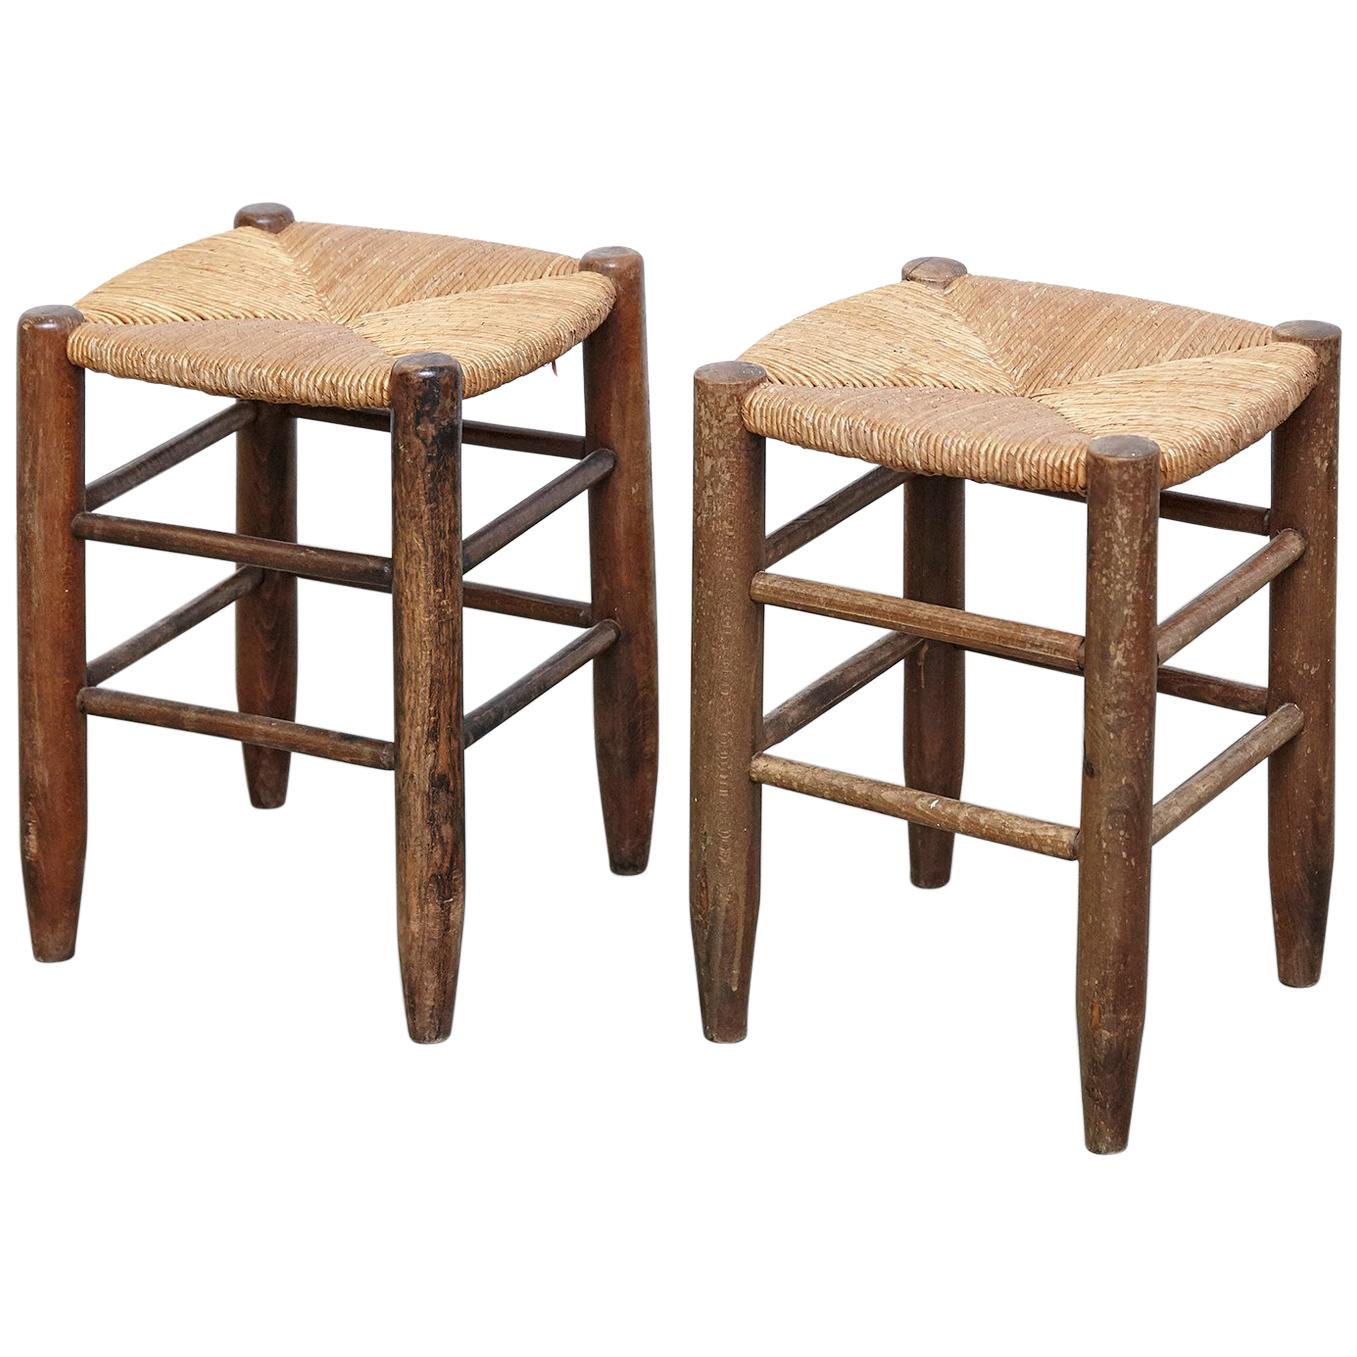 Pair of Charlotte Perriand, Mid Century Modern, Rattan Wood French Stools, 1950